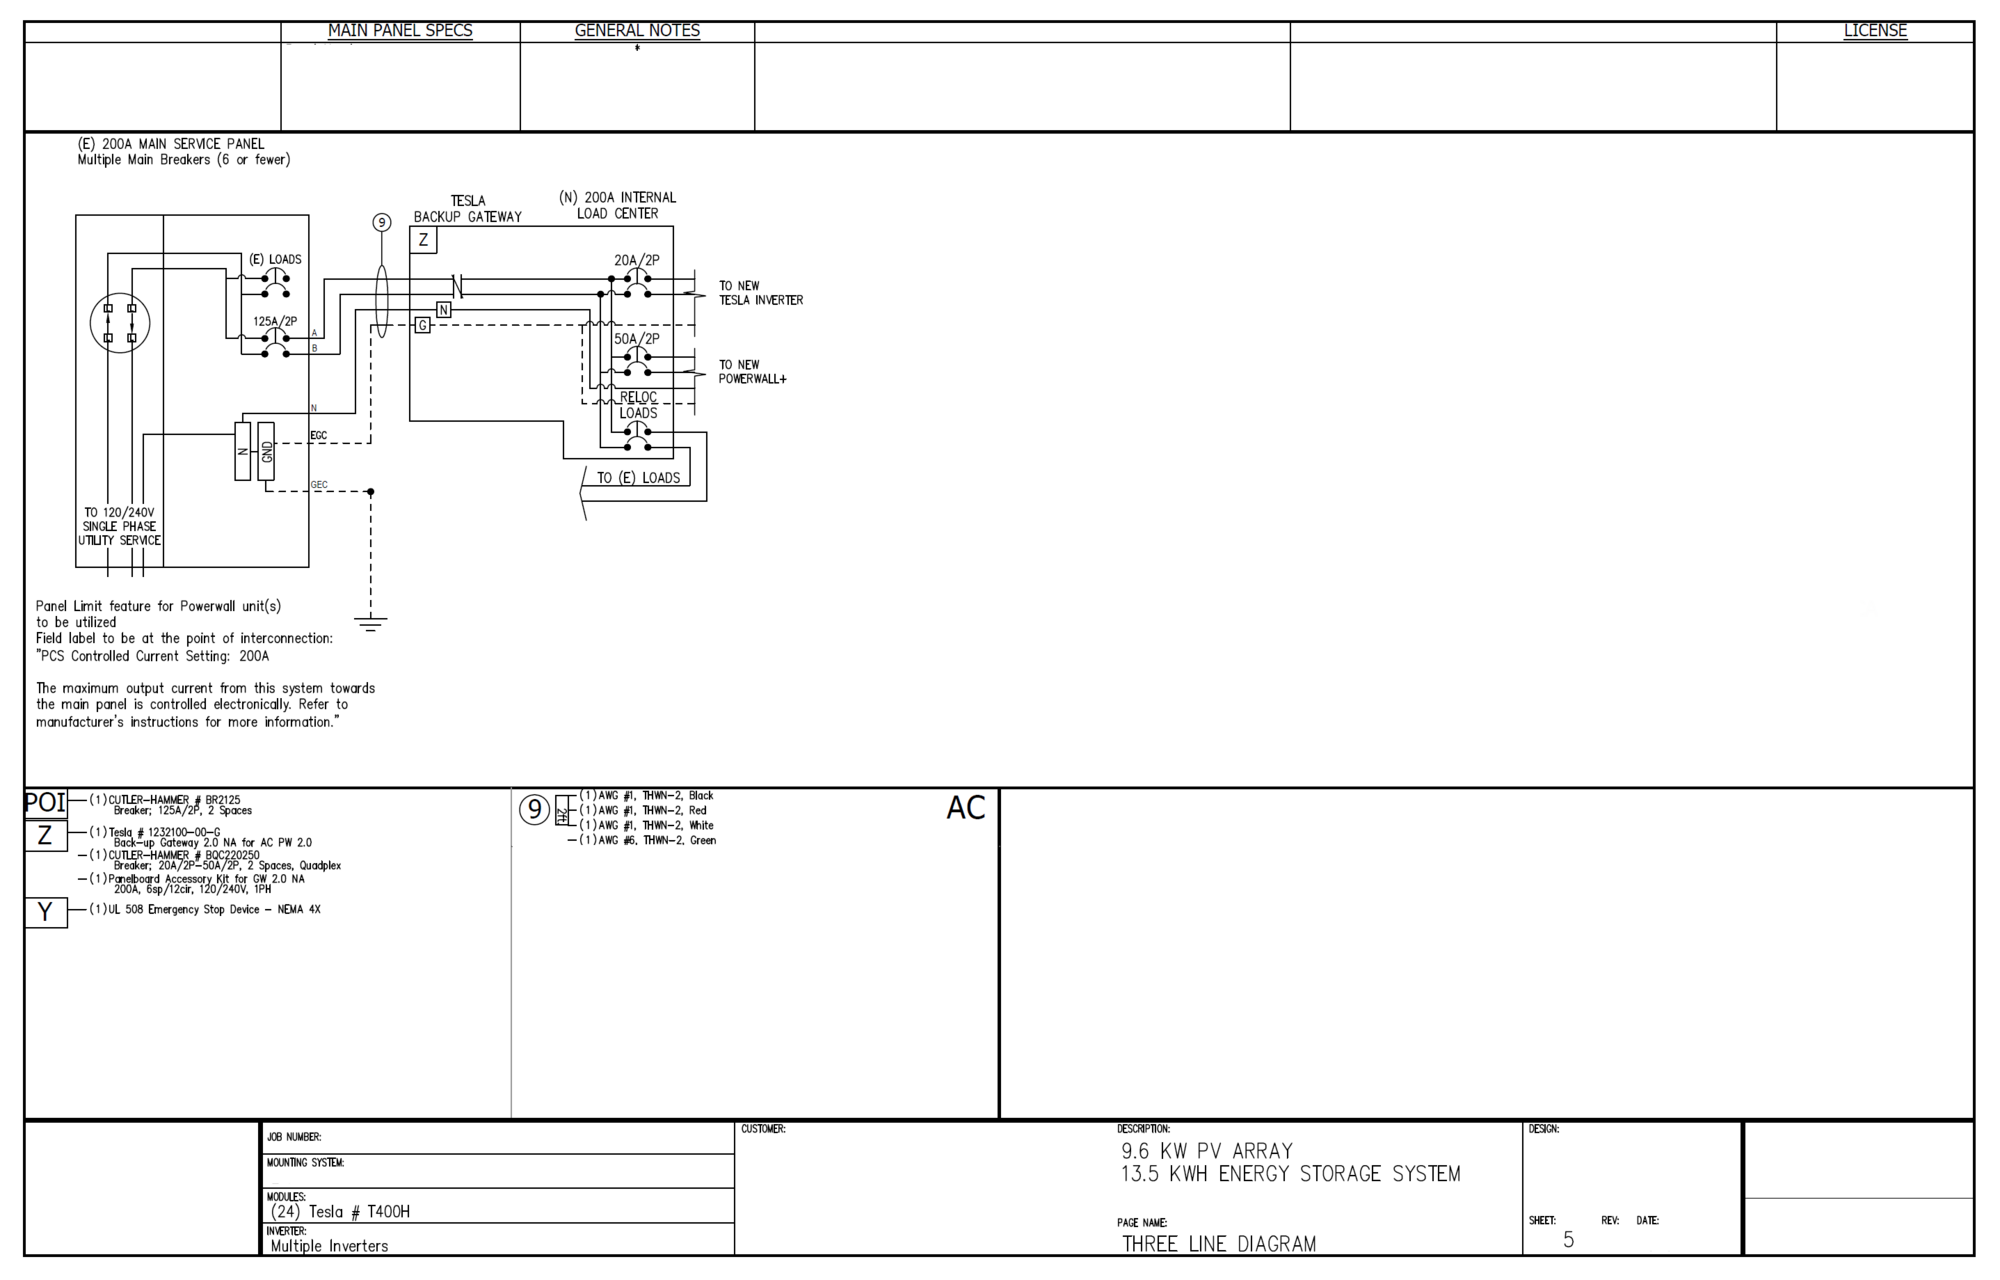 Schematic Sheet 5.png